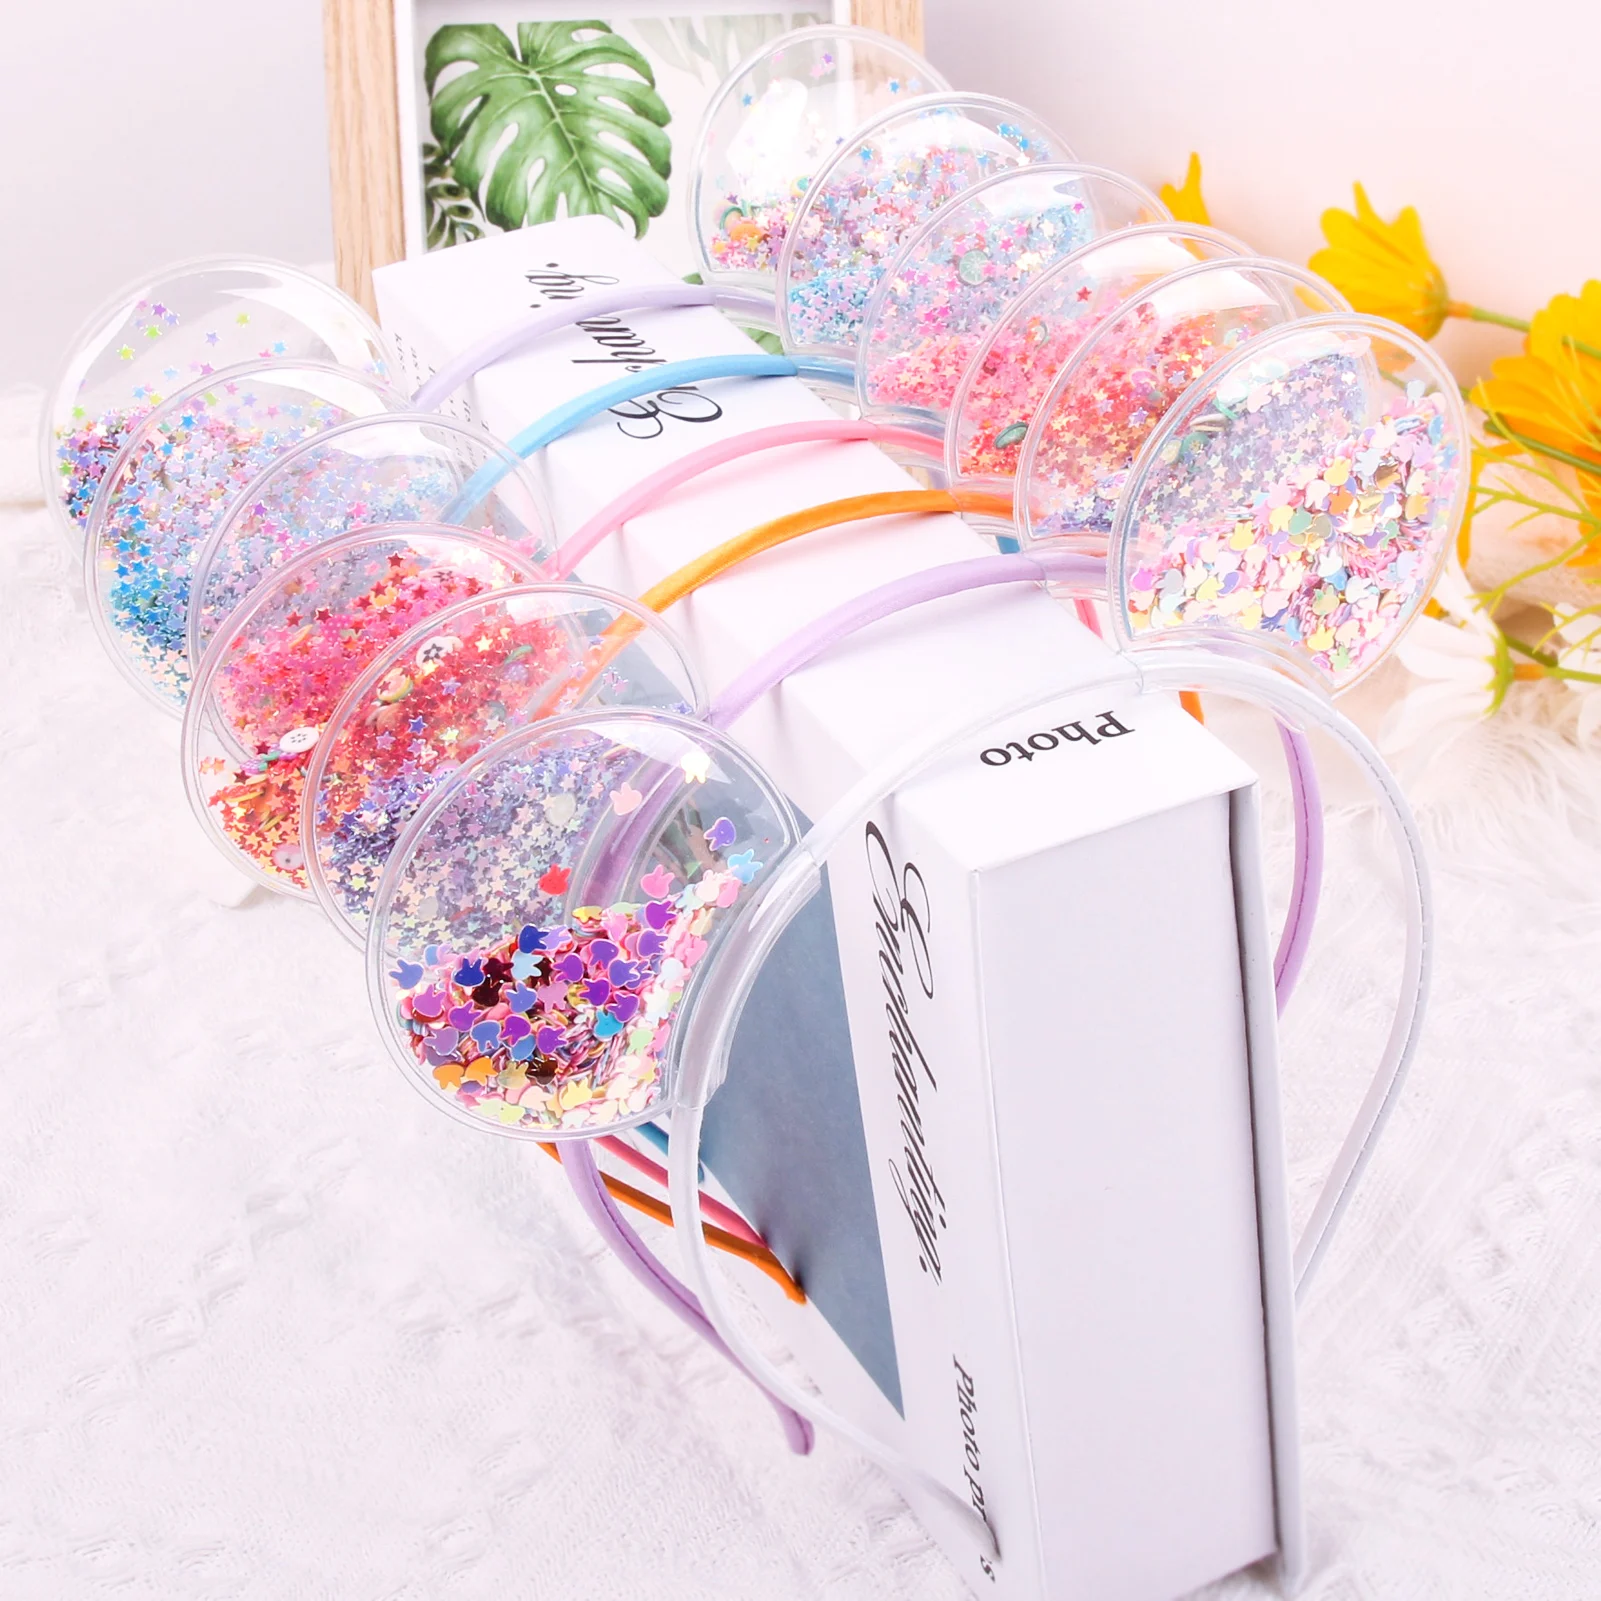 Candygirl Transparent Cat Ears Headband Quicksand Bows Hair Hoop Cute Colorful Sequins Hairbands Girls Princess Hair Accessories candygirl glitter headbands for girls cute sparkly hair hoops different colors sequin cartoon star hair bands accessories